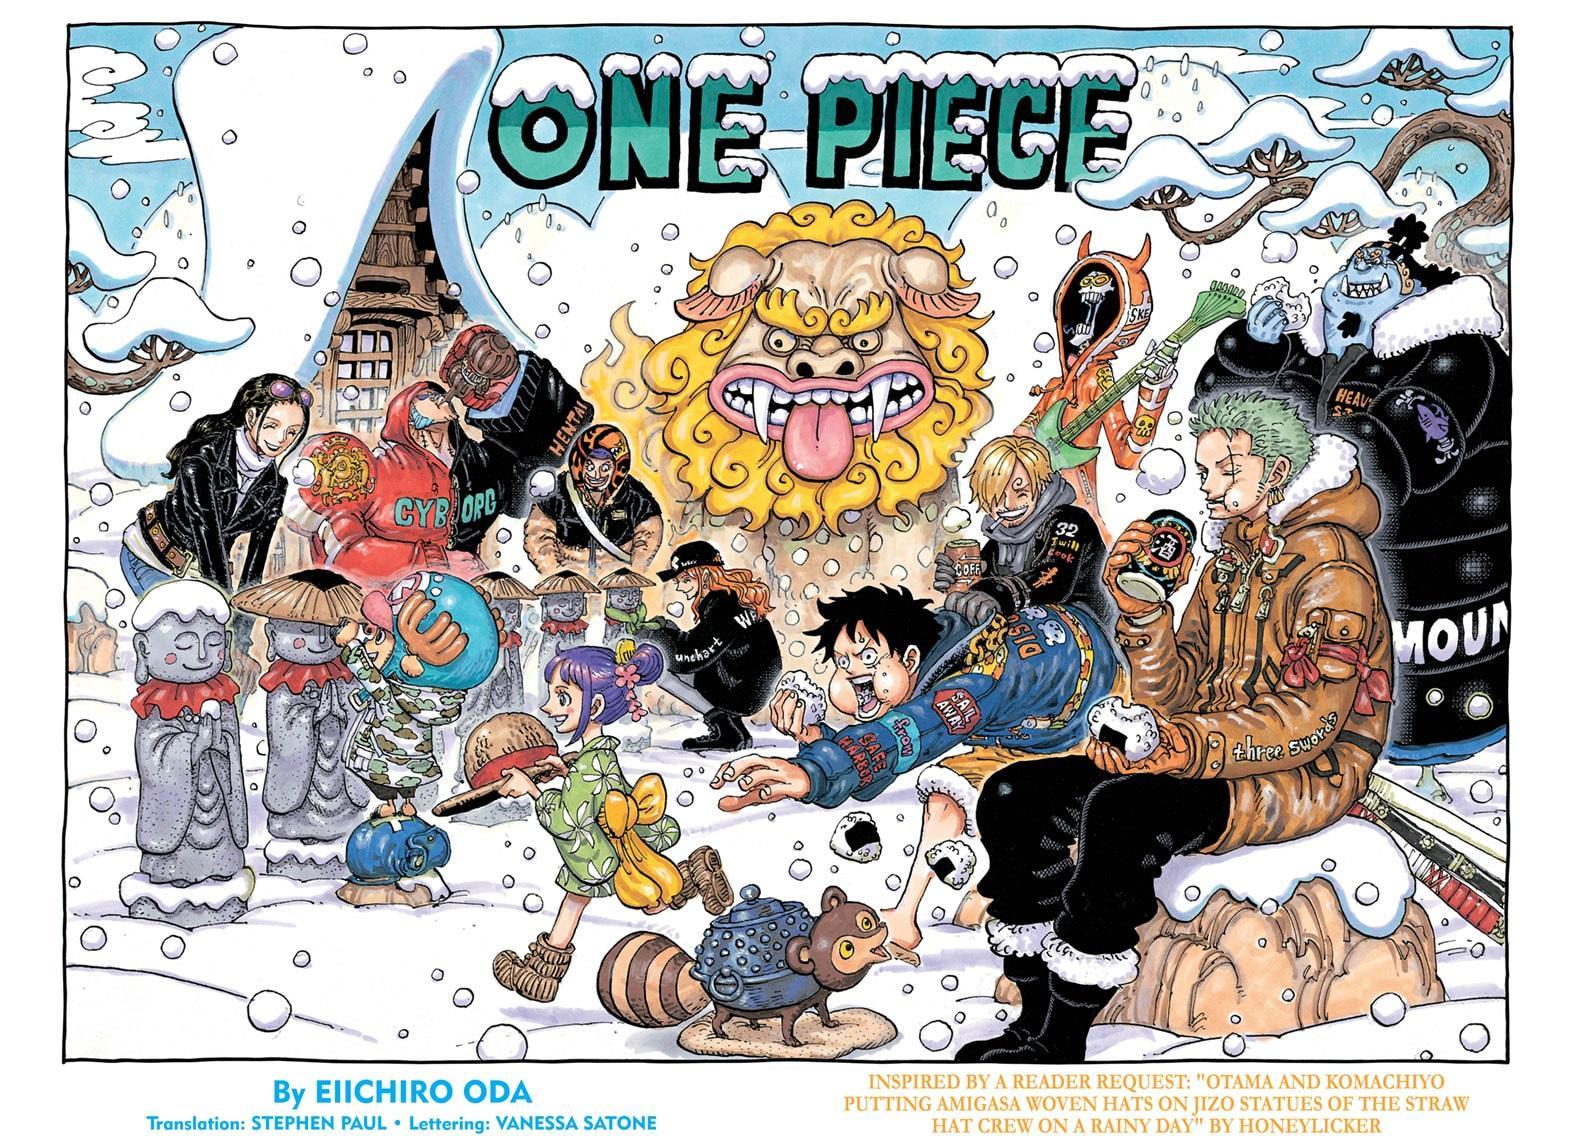 The New Emperor - One Piece Manga Chapter 1058 Fully Coloured